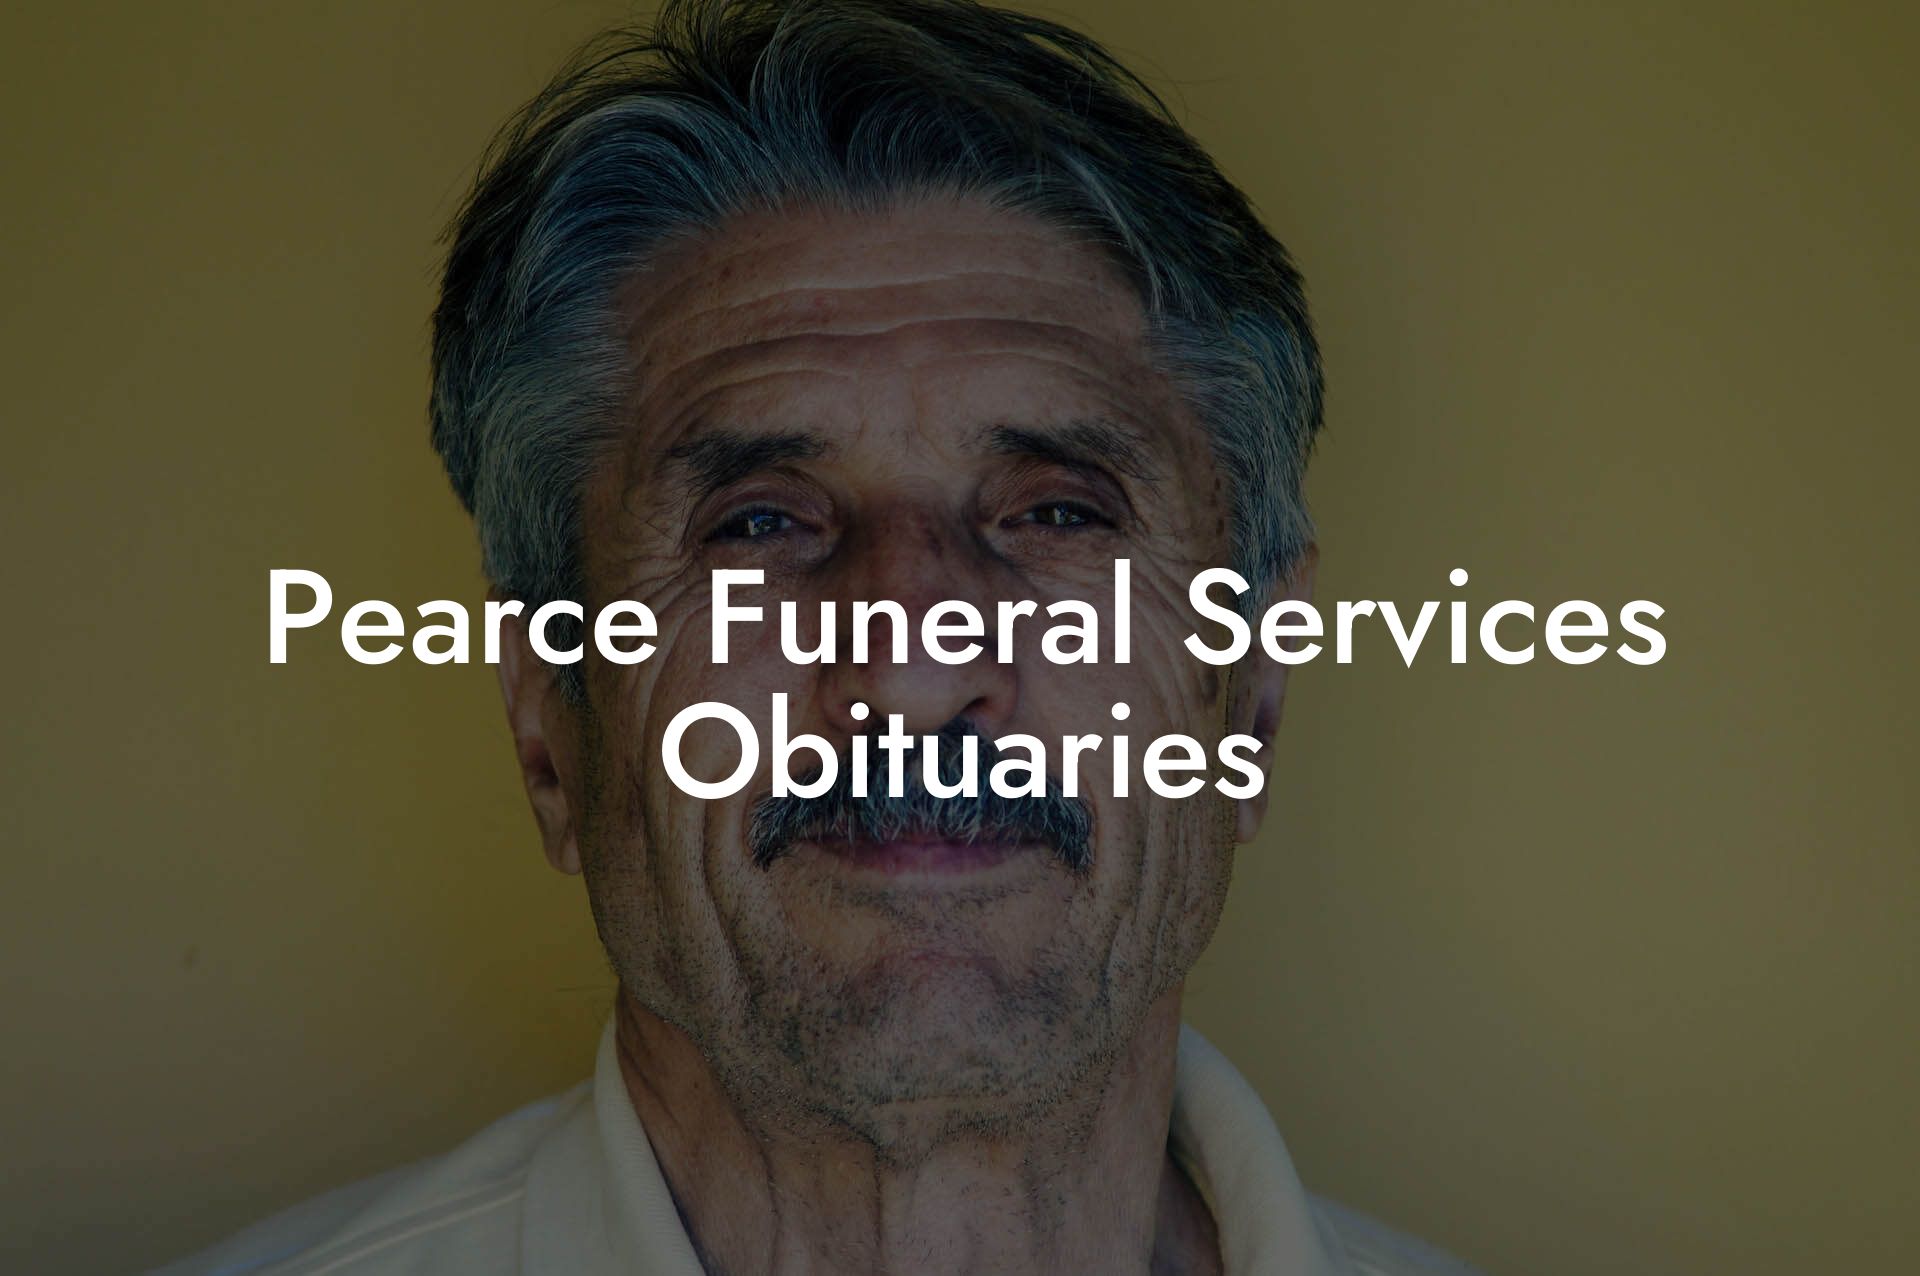 Pearce Funeral Services Obituaries